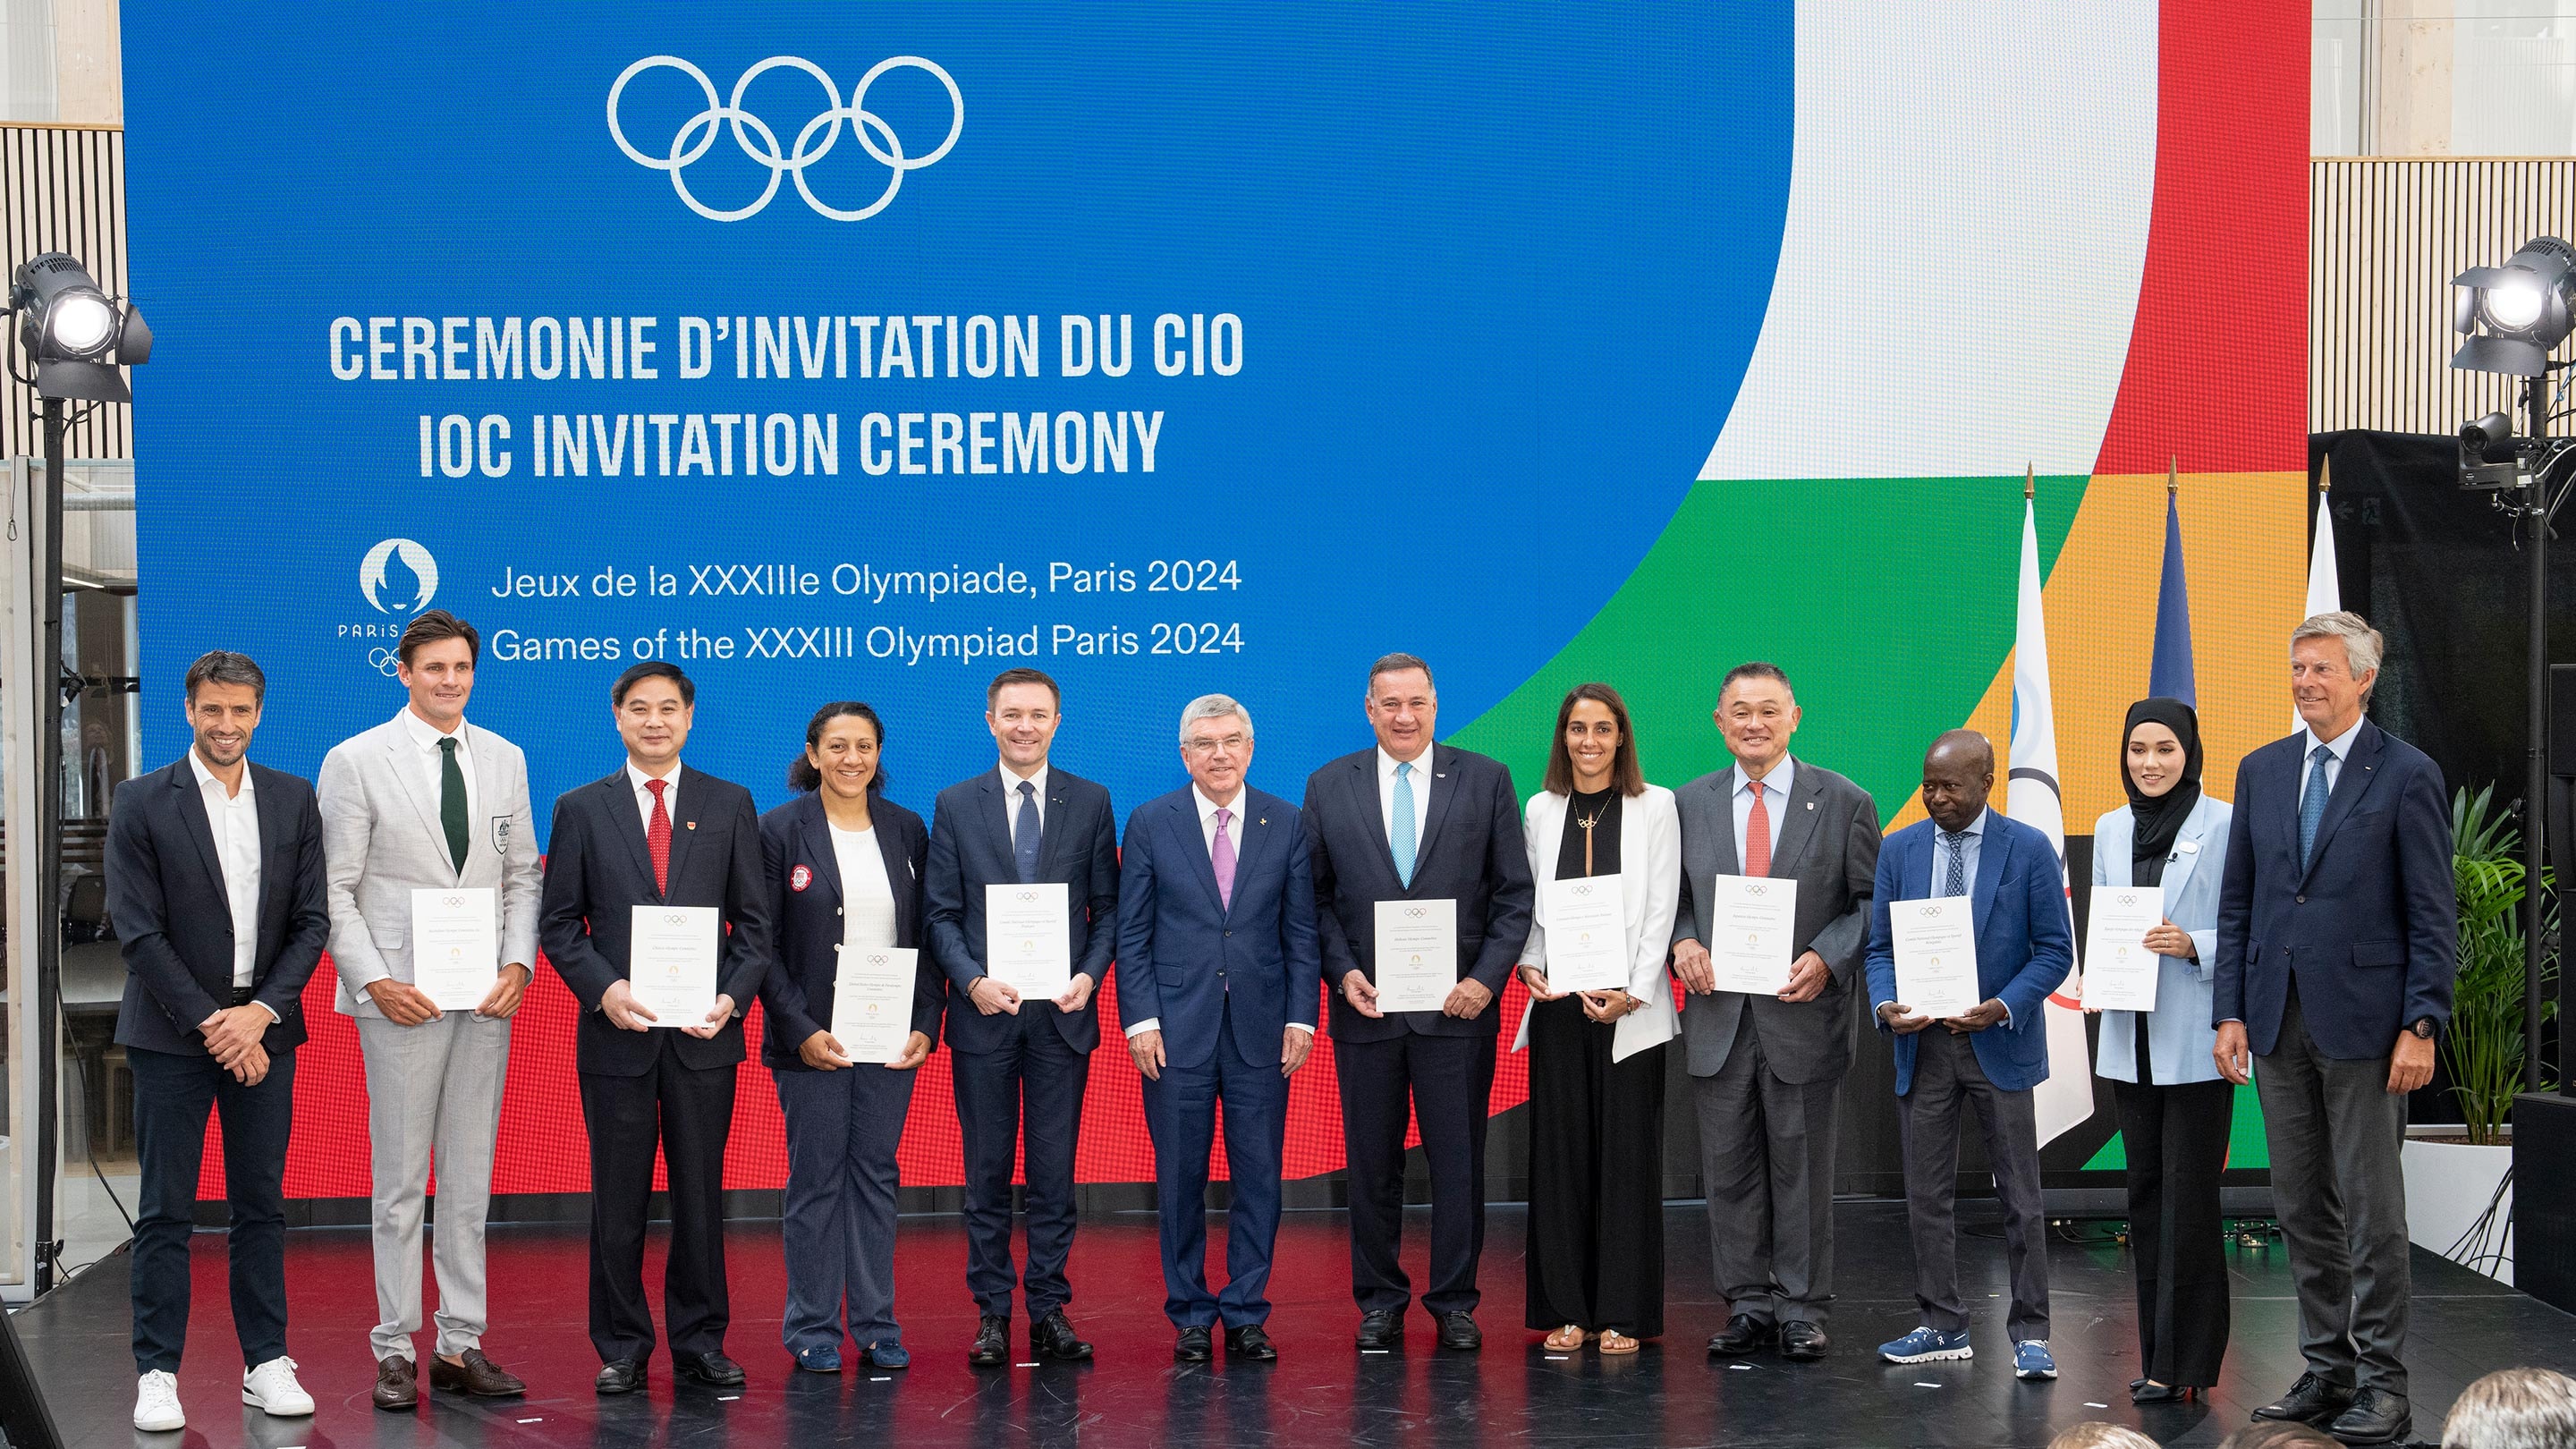 LVMH just became a premium sponsor of the 2024 Paris Olympics